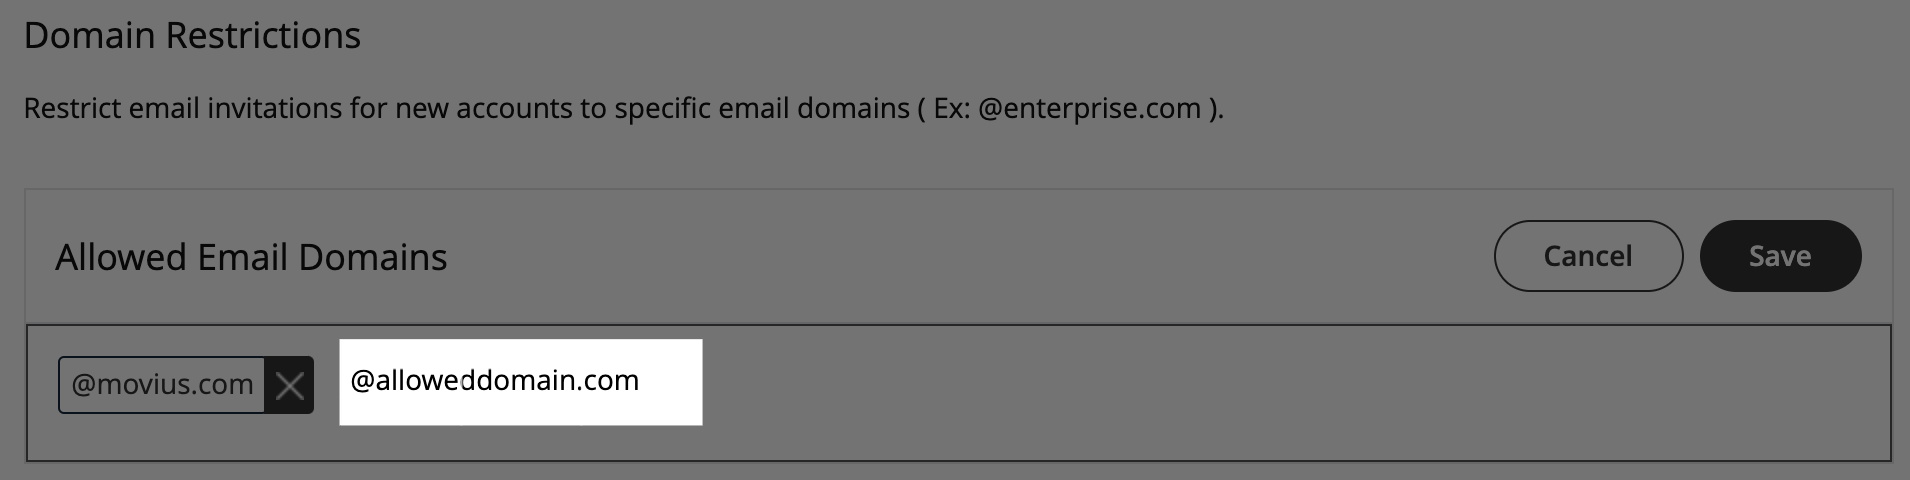 adding an allowed email domain screen